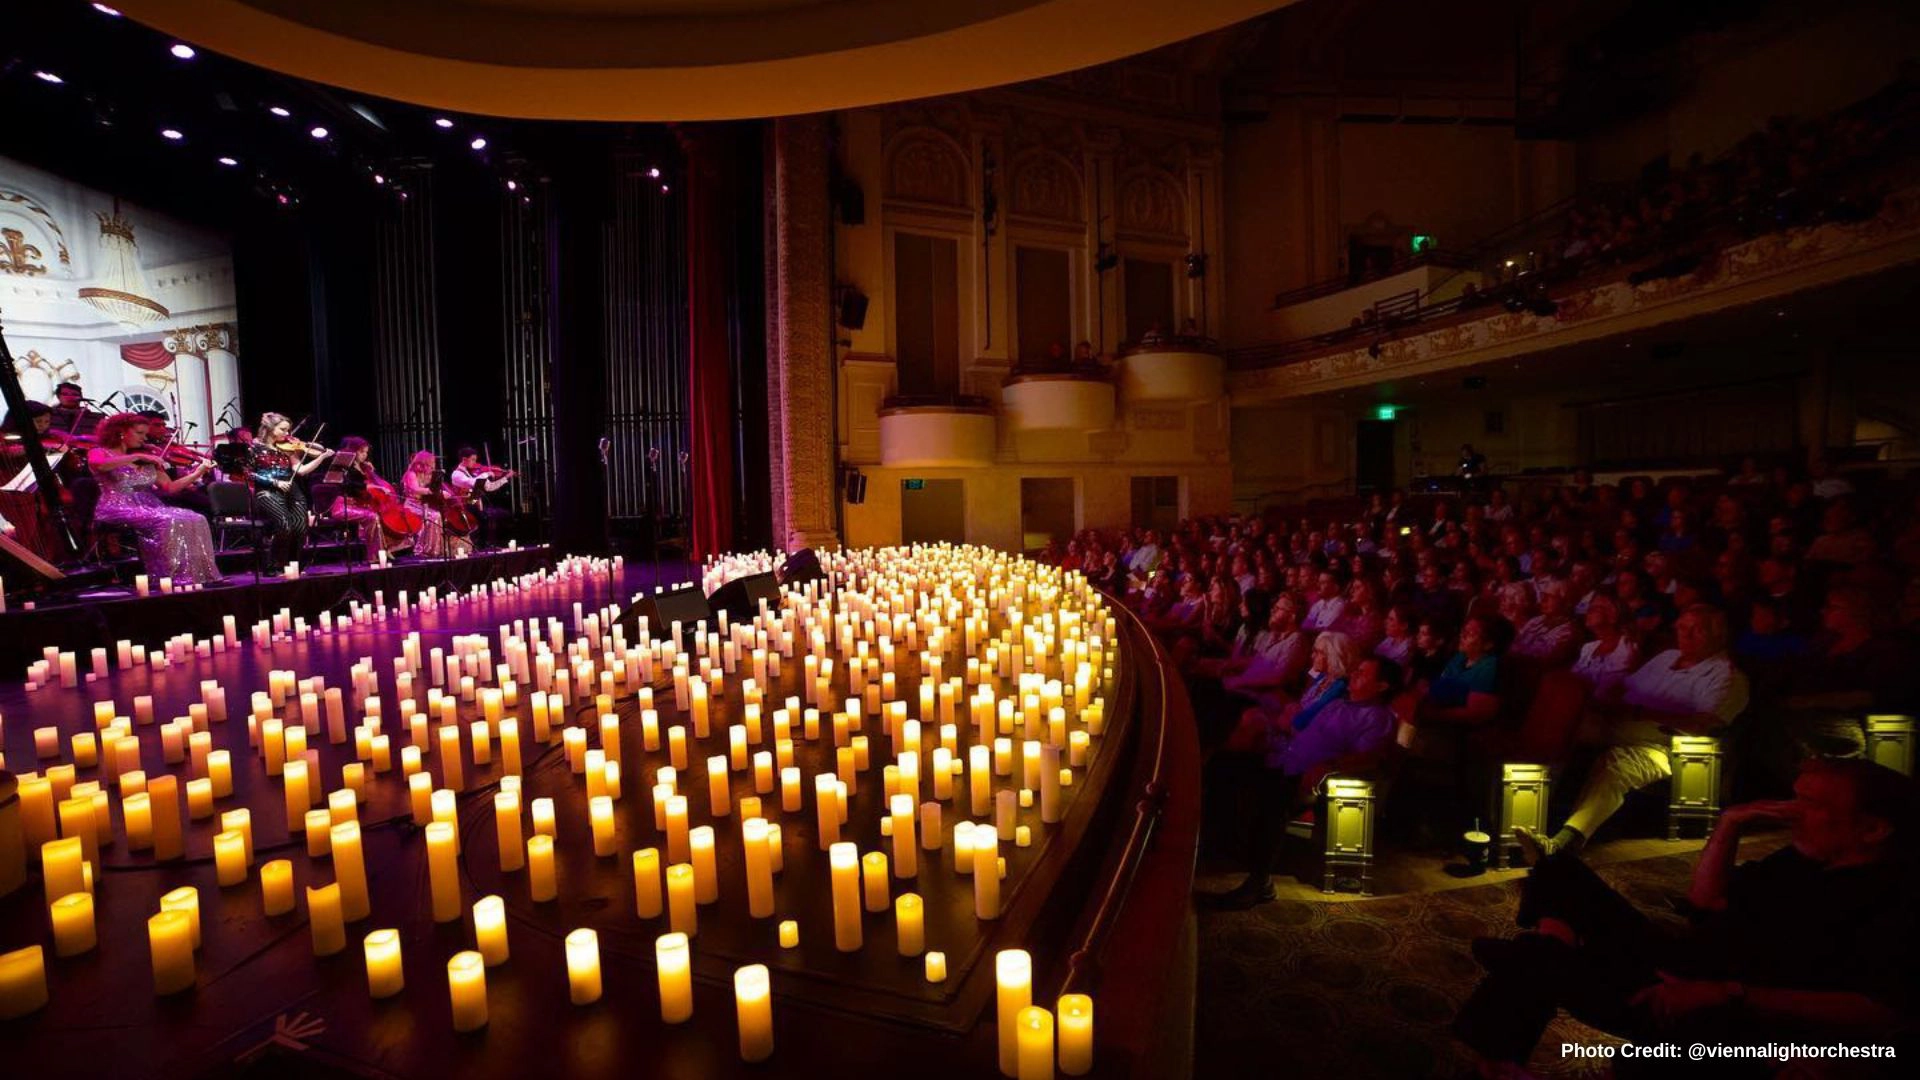 Vienna Light Orchestra playing on stage surrounded by candle light and audience